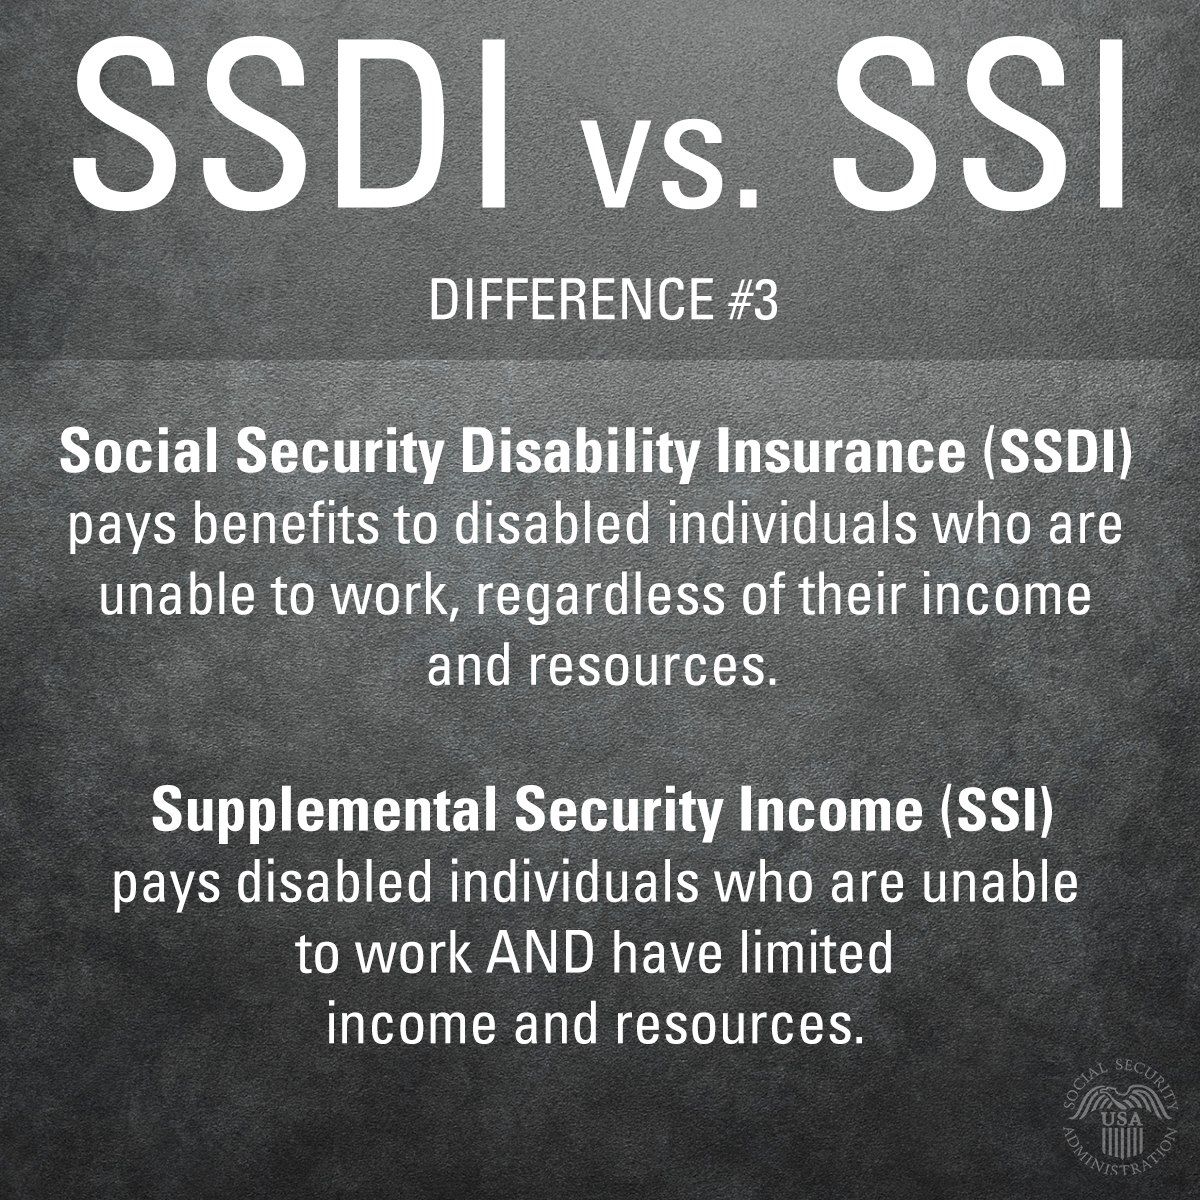 There are many differences between the Social Security Disability Insur ...